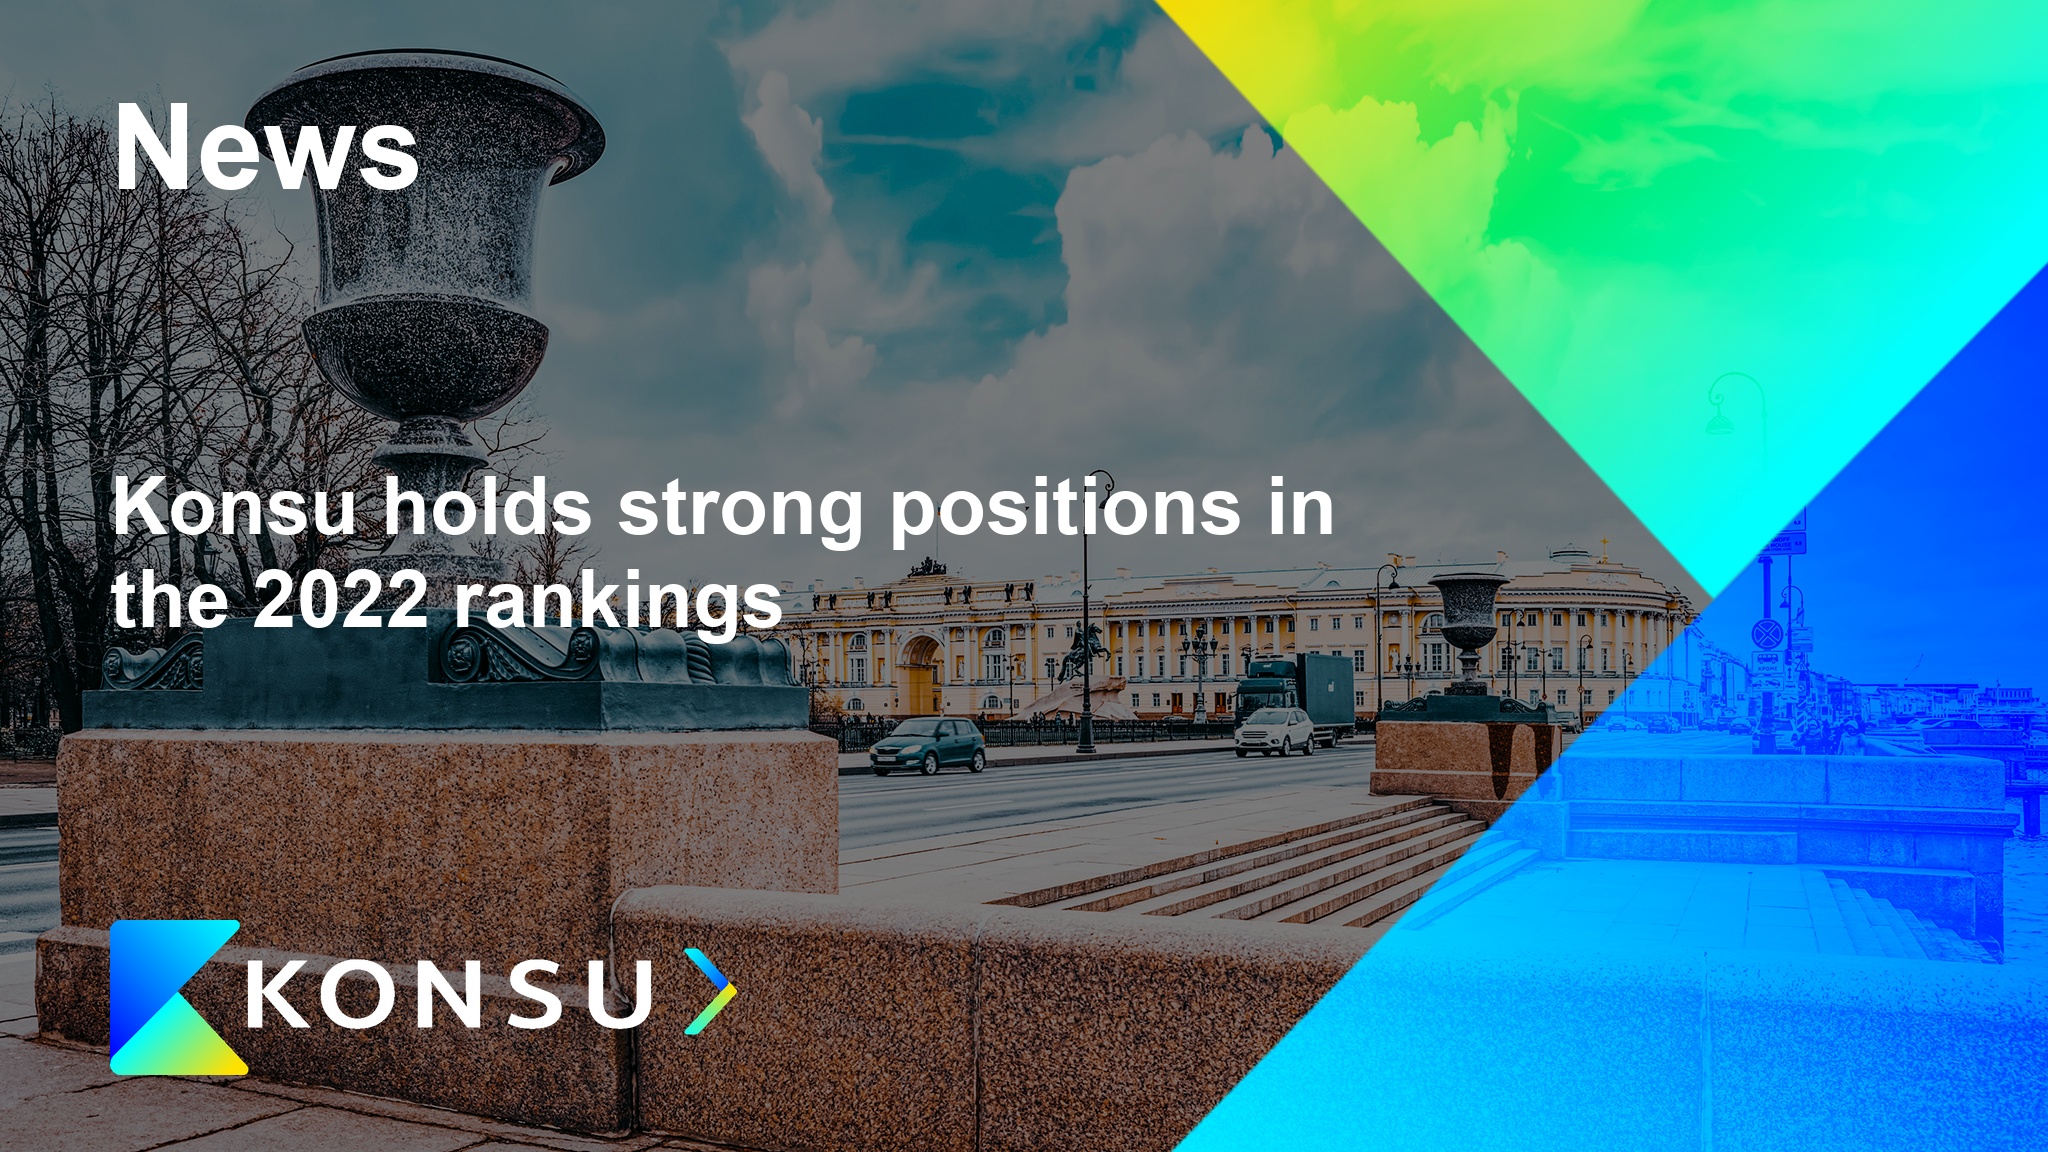 Konsu holds strong positions the 2022 rankings en konsu outsourc